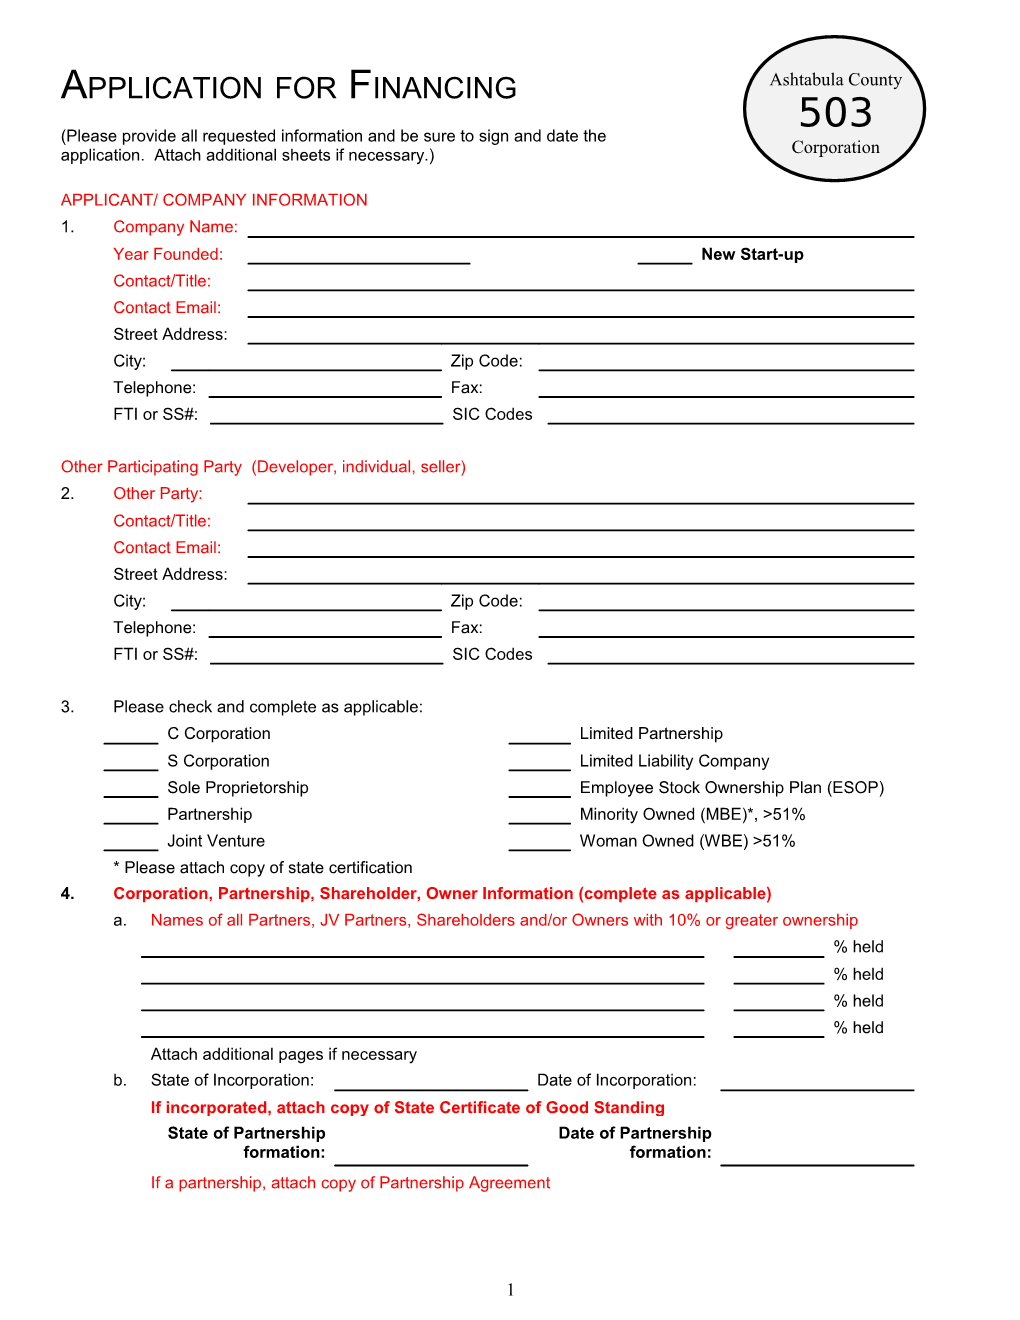 Application for Financing